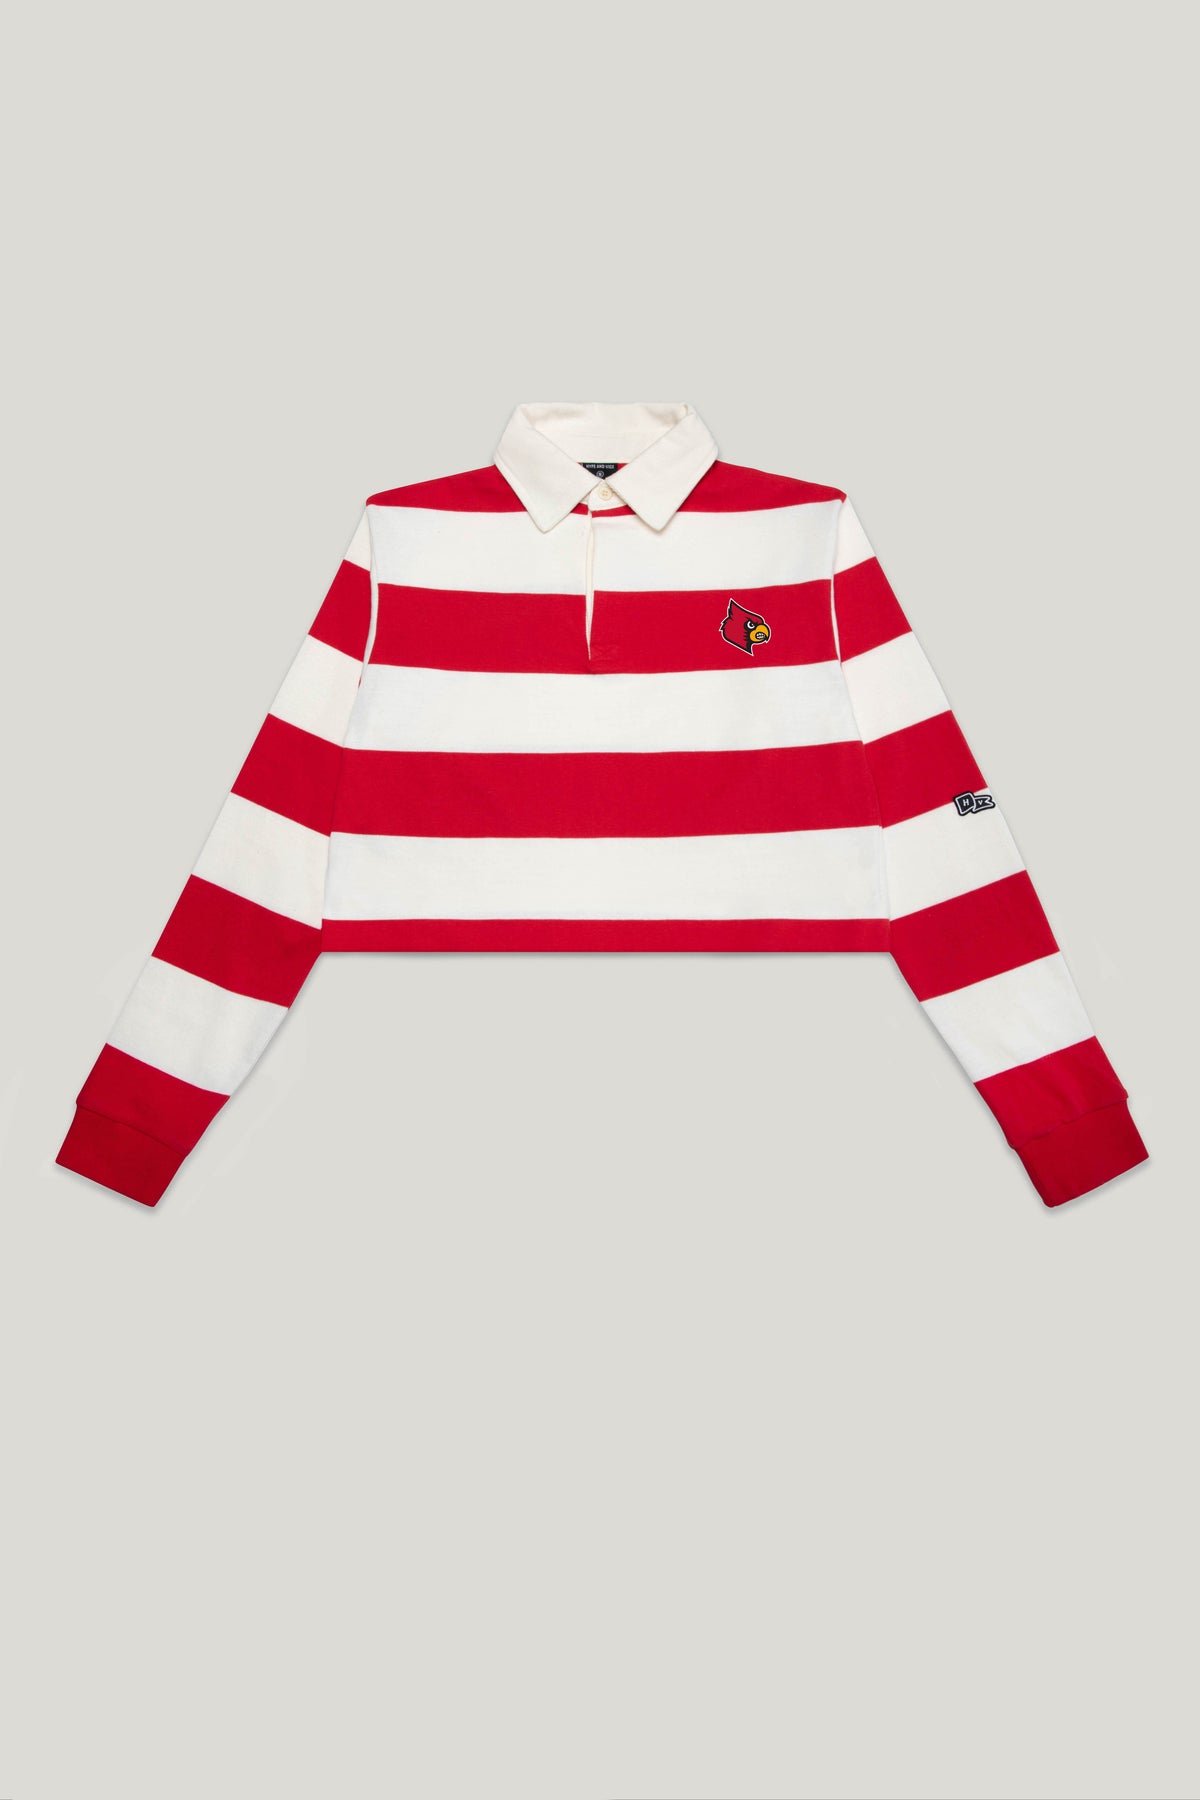 University of Louisville Rugby Top Small / Red and White | Hype and Vice